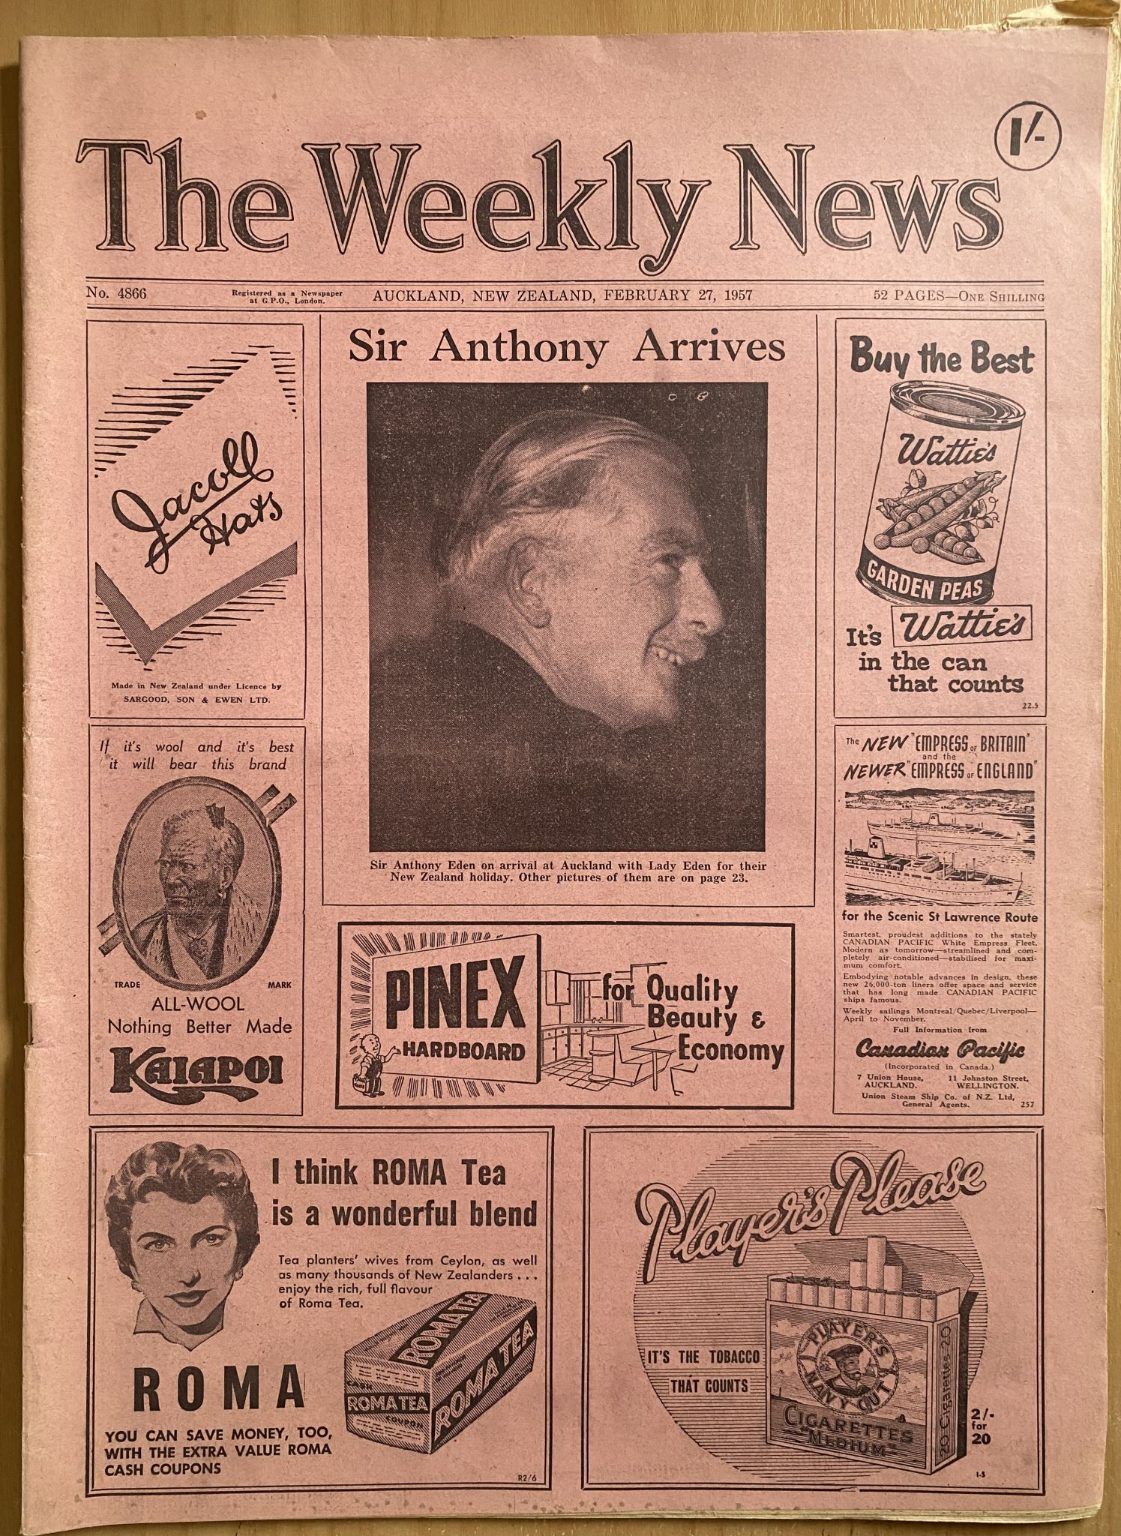 OLD NEWSPAPER: The Weekly News, No. 4866, 27 February 1957